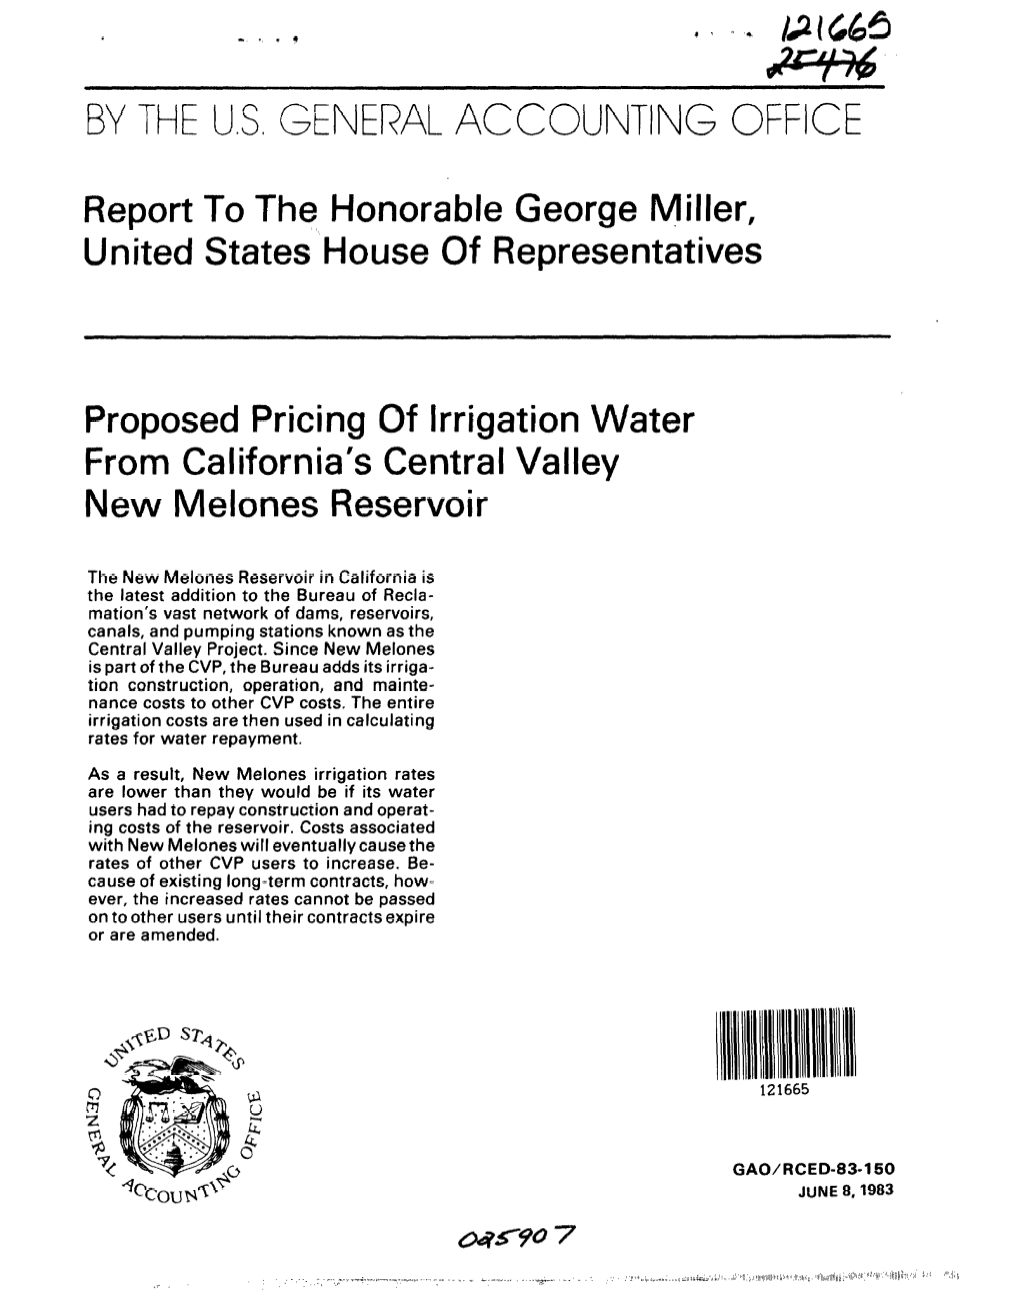 RCED-83-150 Proposed Pricing of Irrigation Water from California's